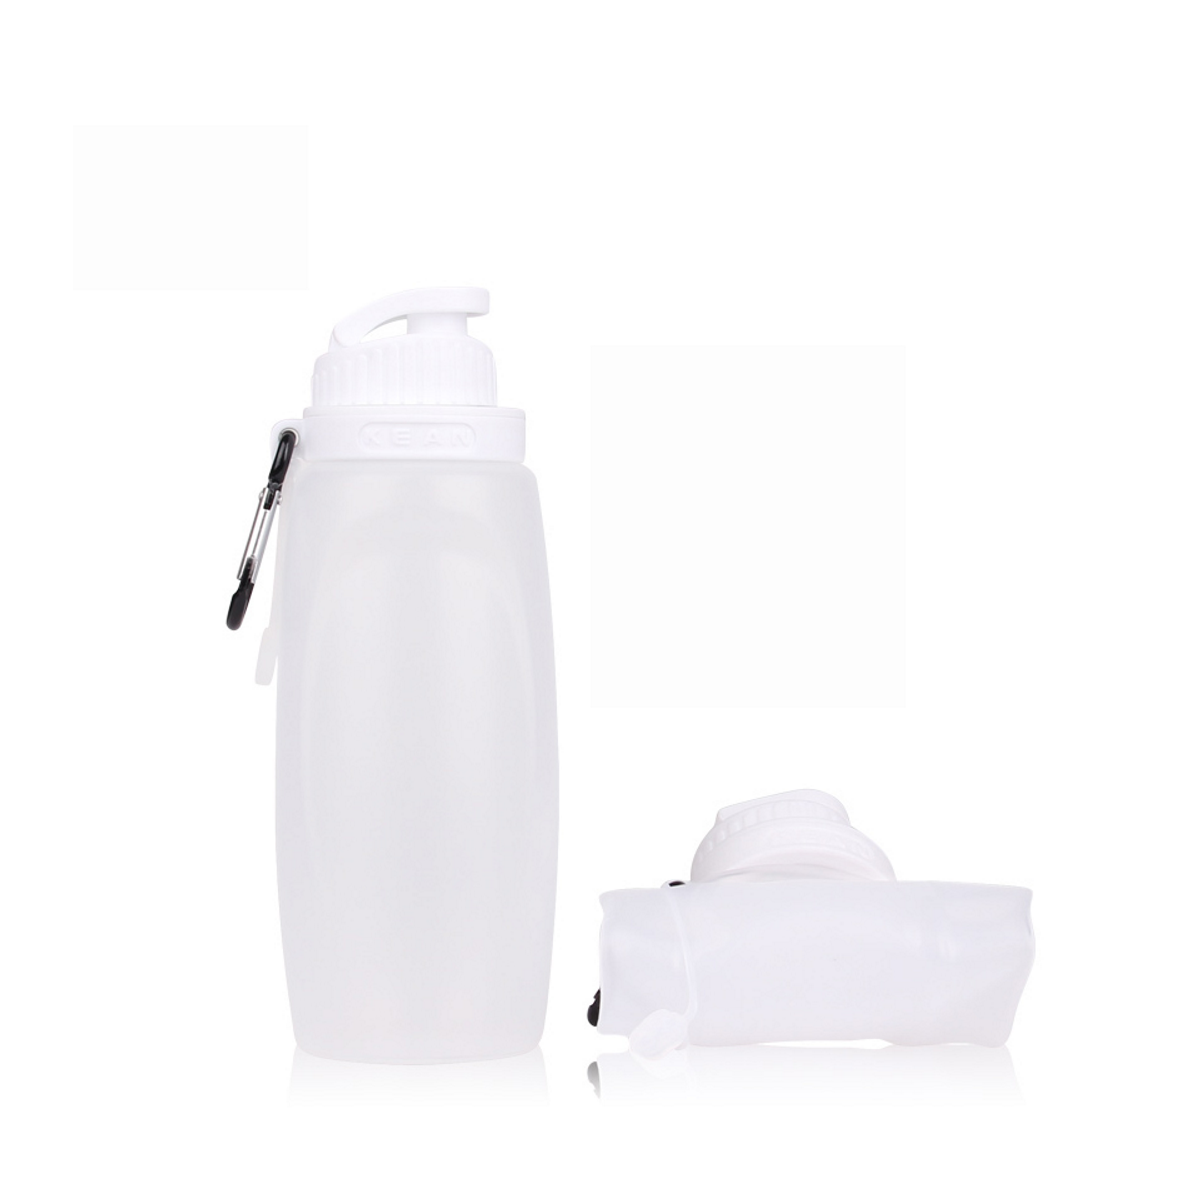 HydraFlex - Portable Collapsible BPA Free Silicone Flexible Sports Drink Bottle